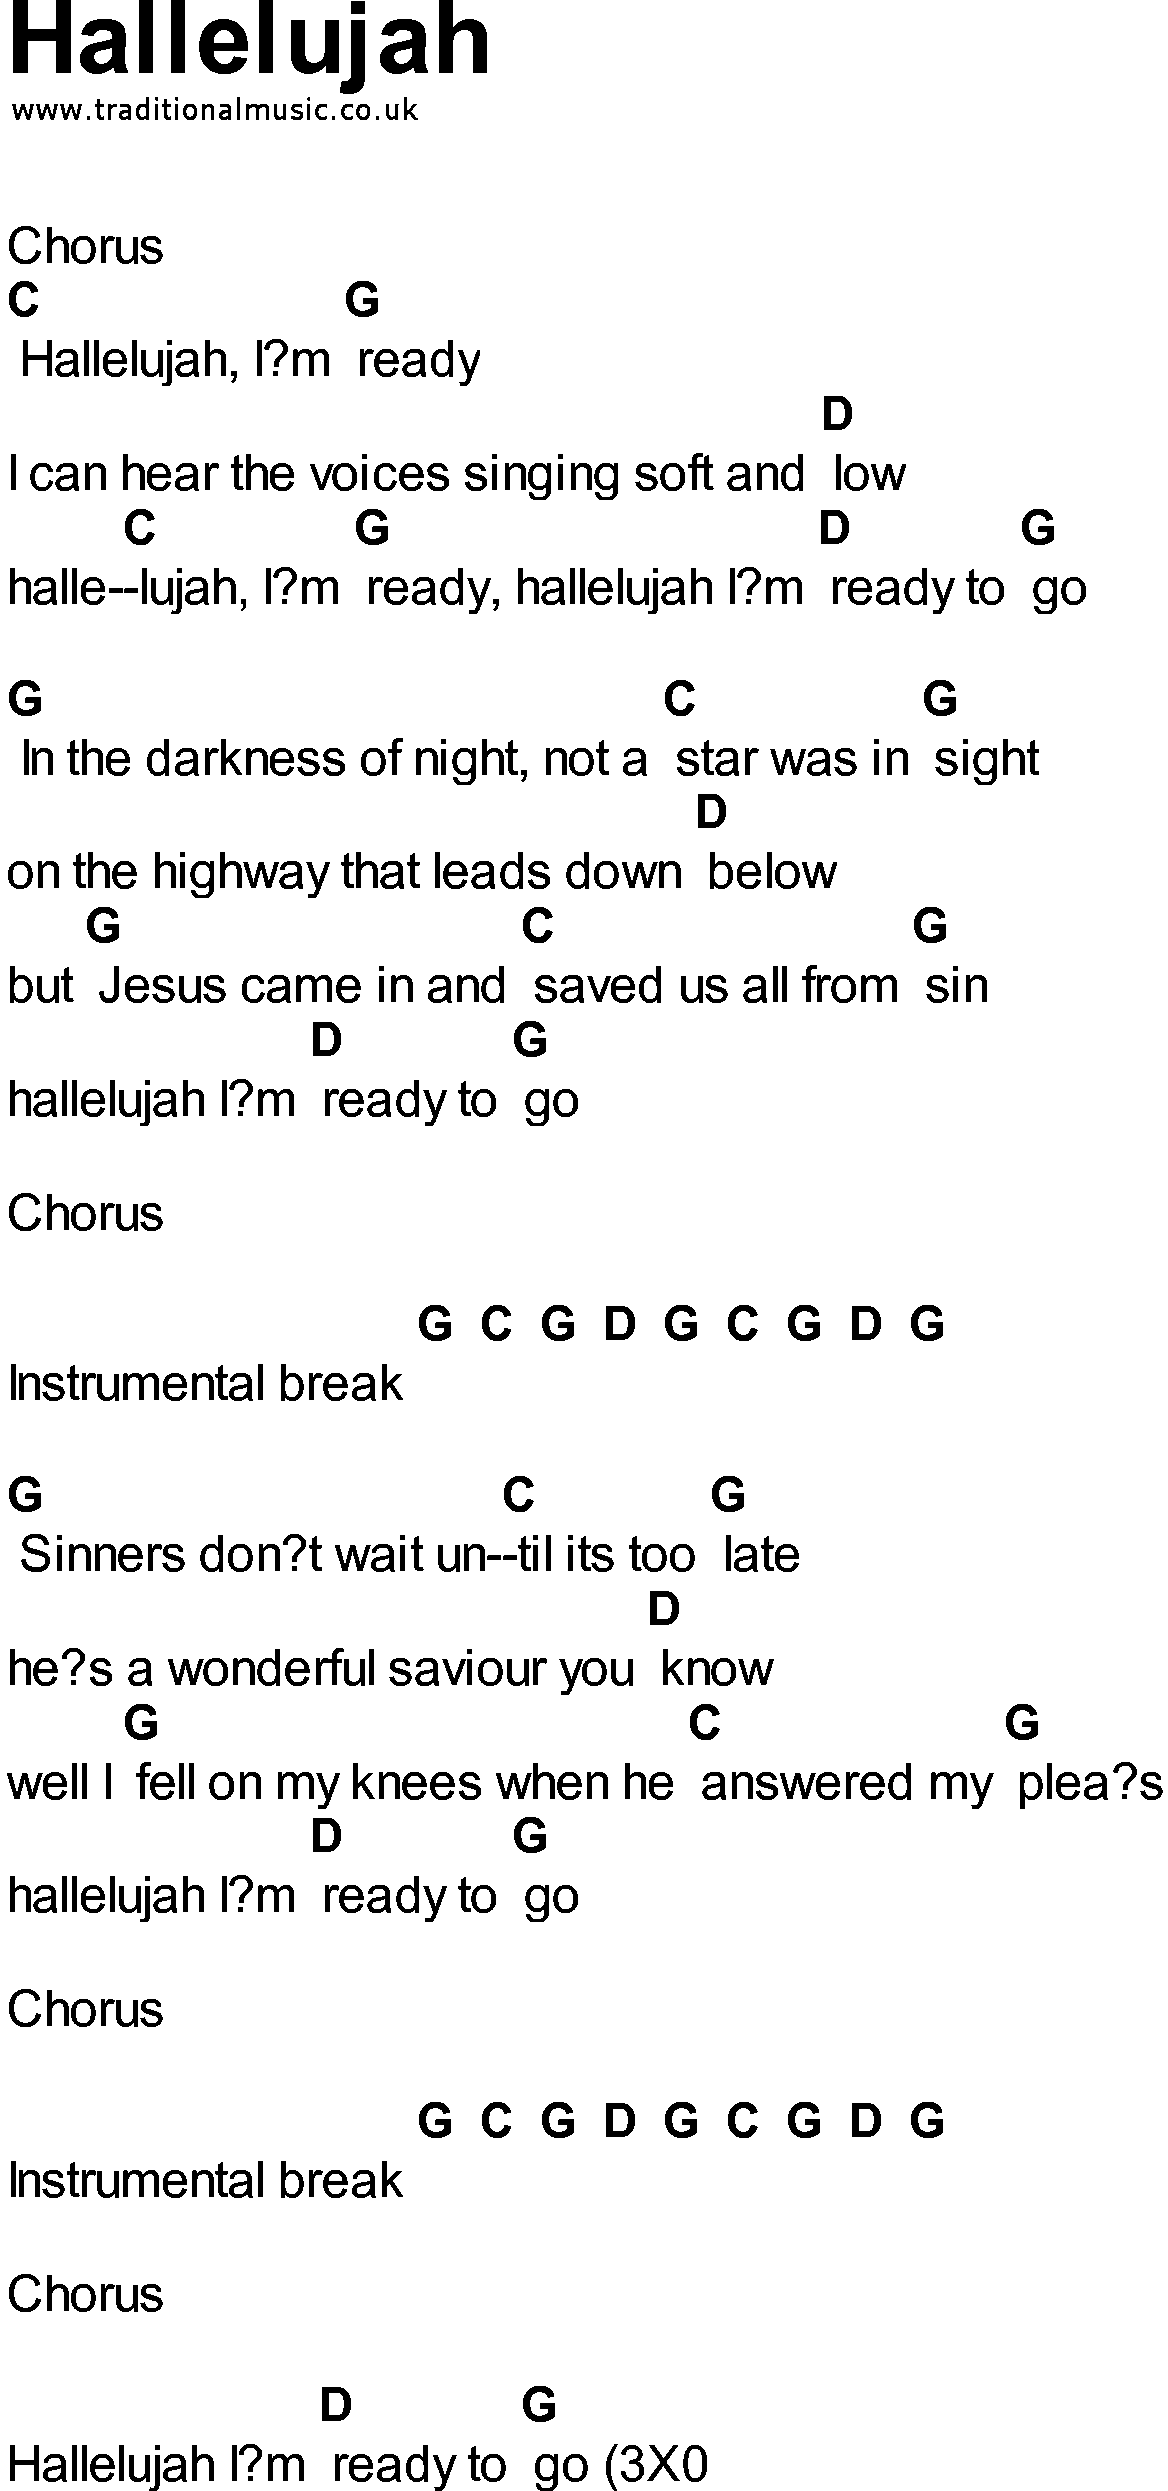 Bluegrass songs with chords - Hallelujah